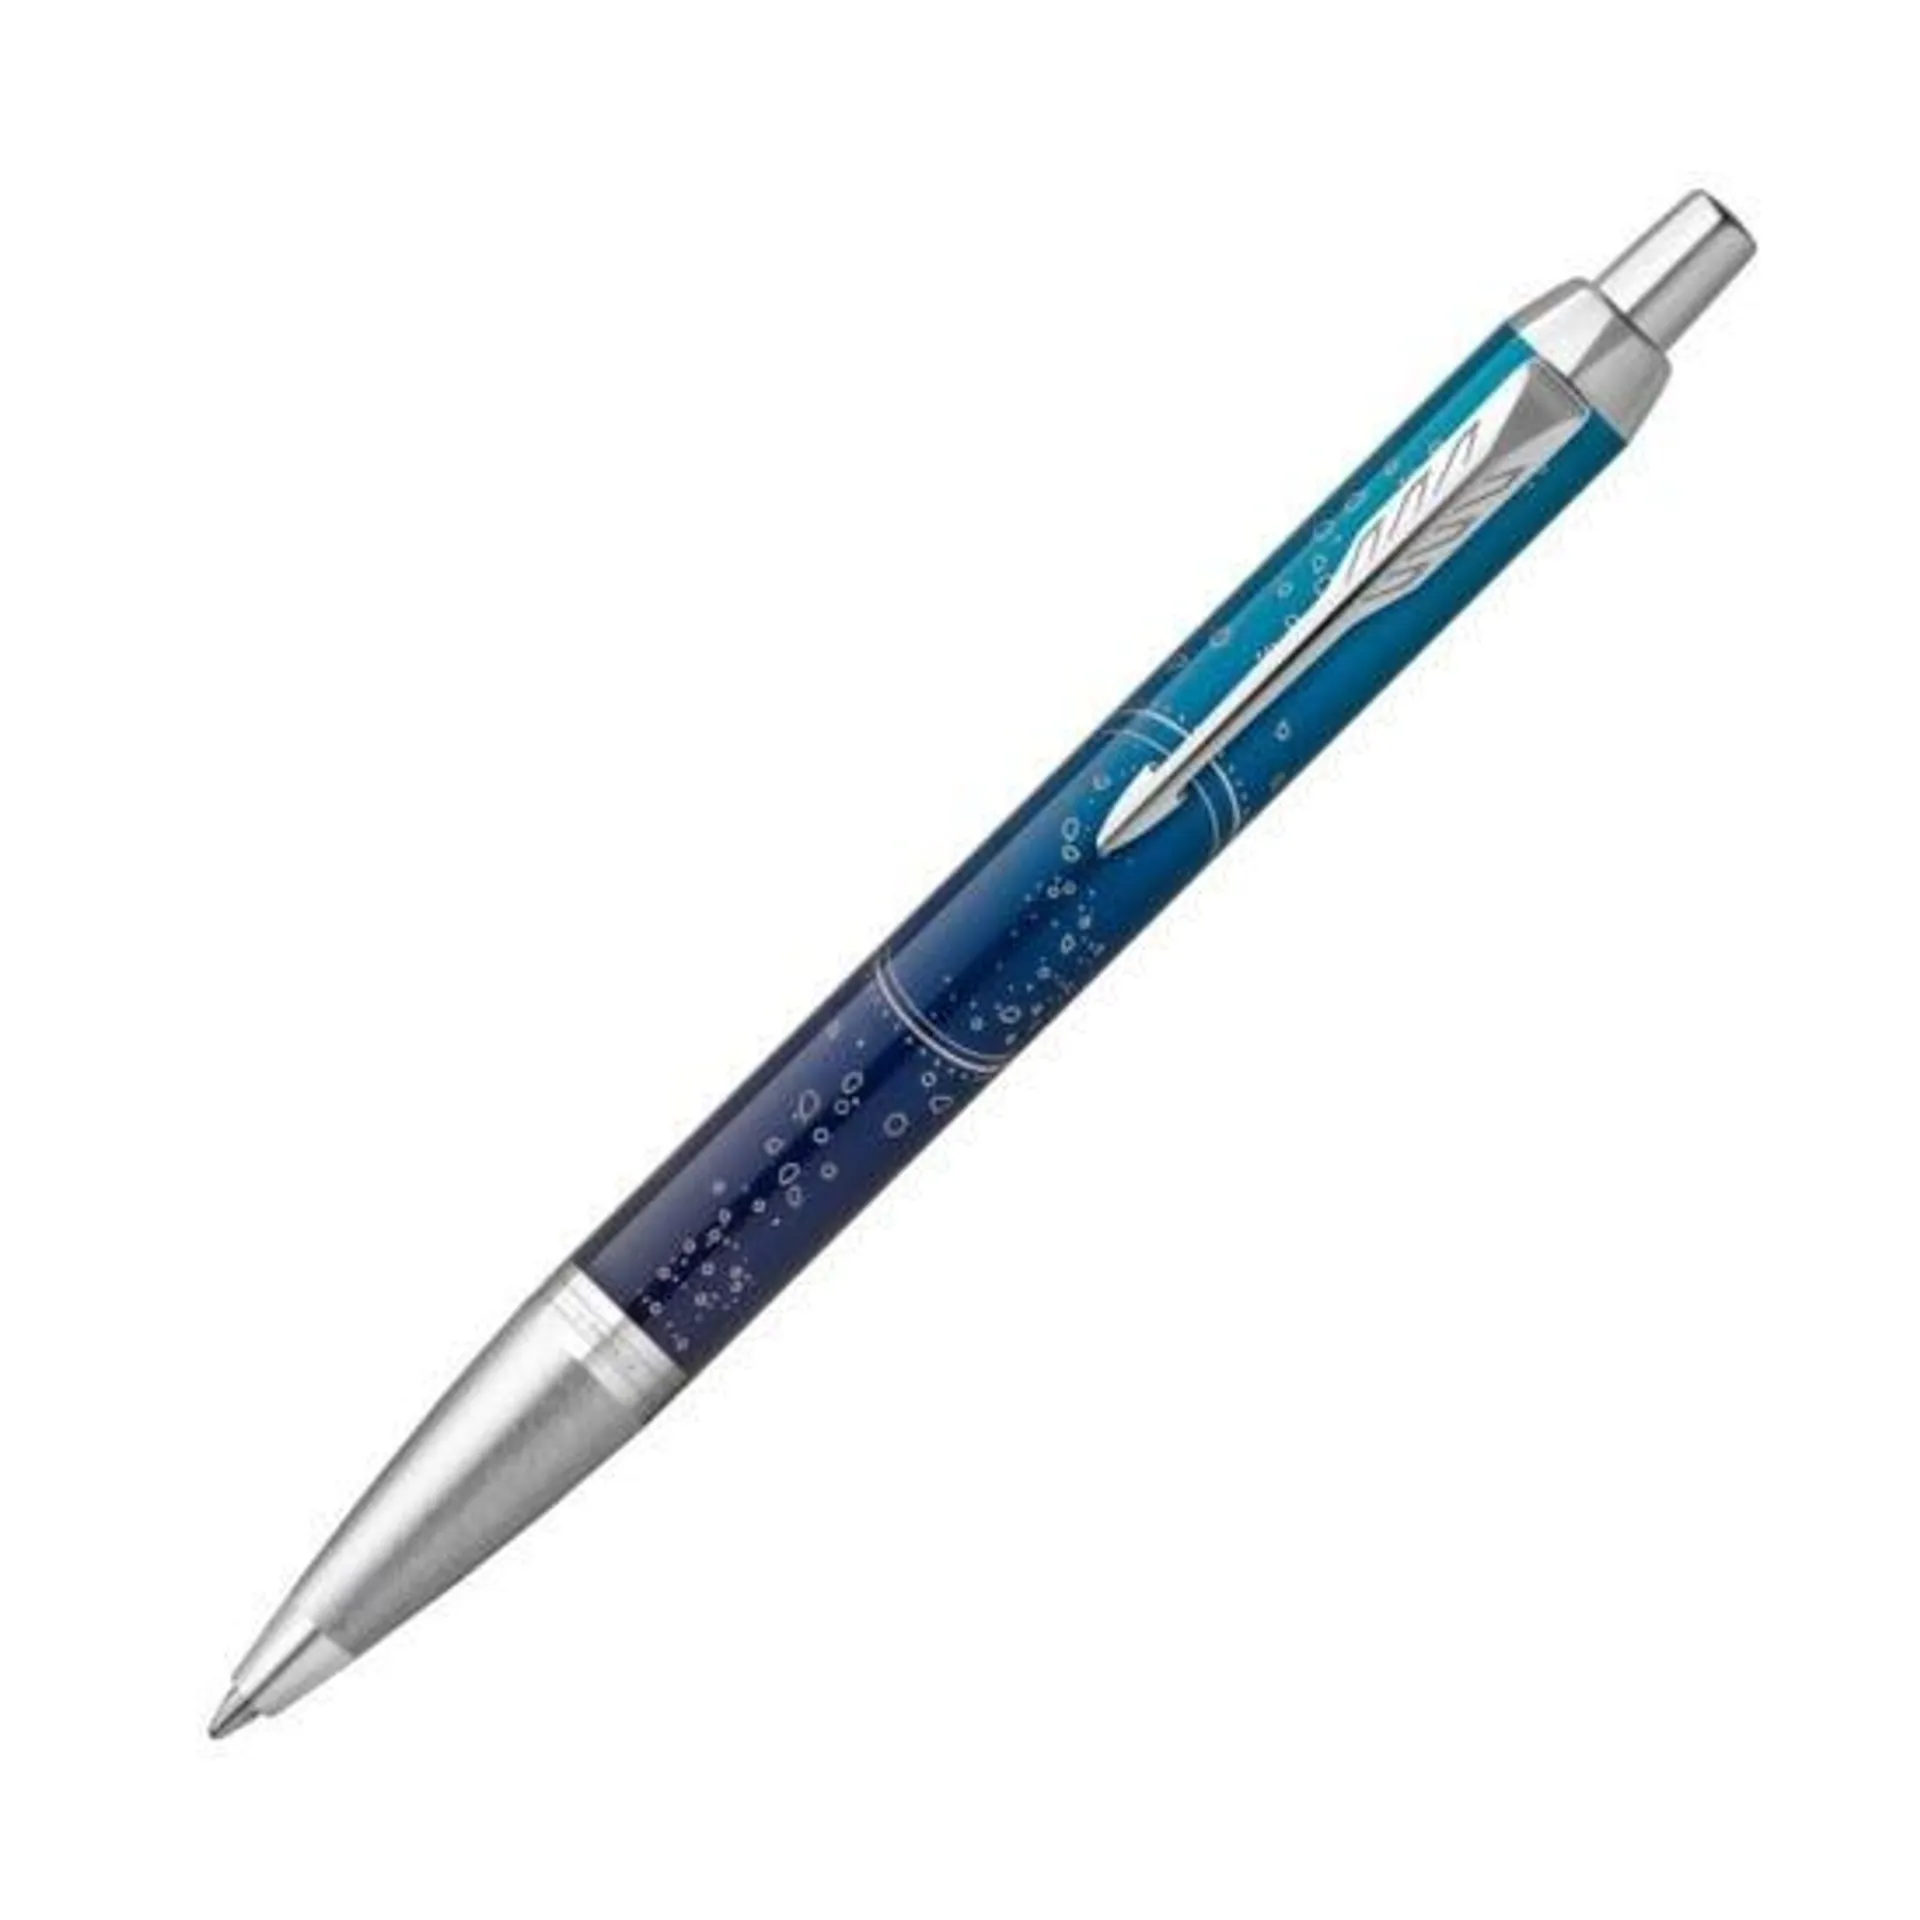 Parker IM Submerge Ballpoint Pen with Blue Ink Refill